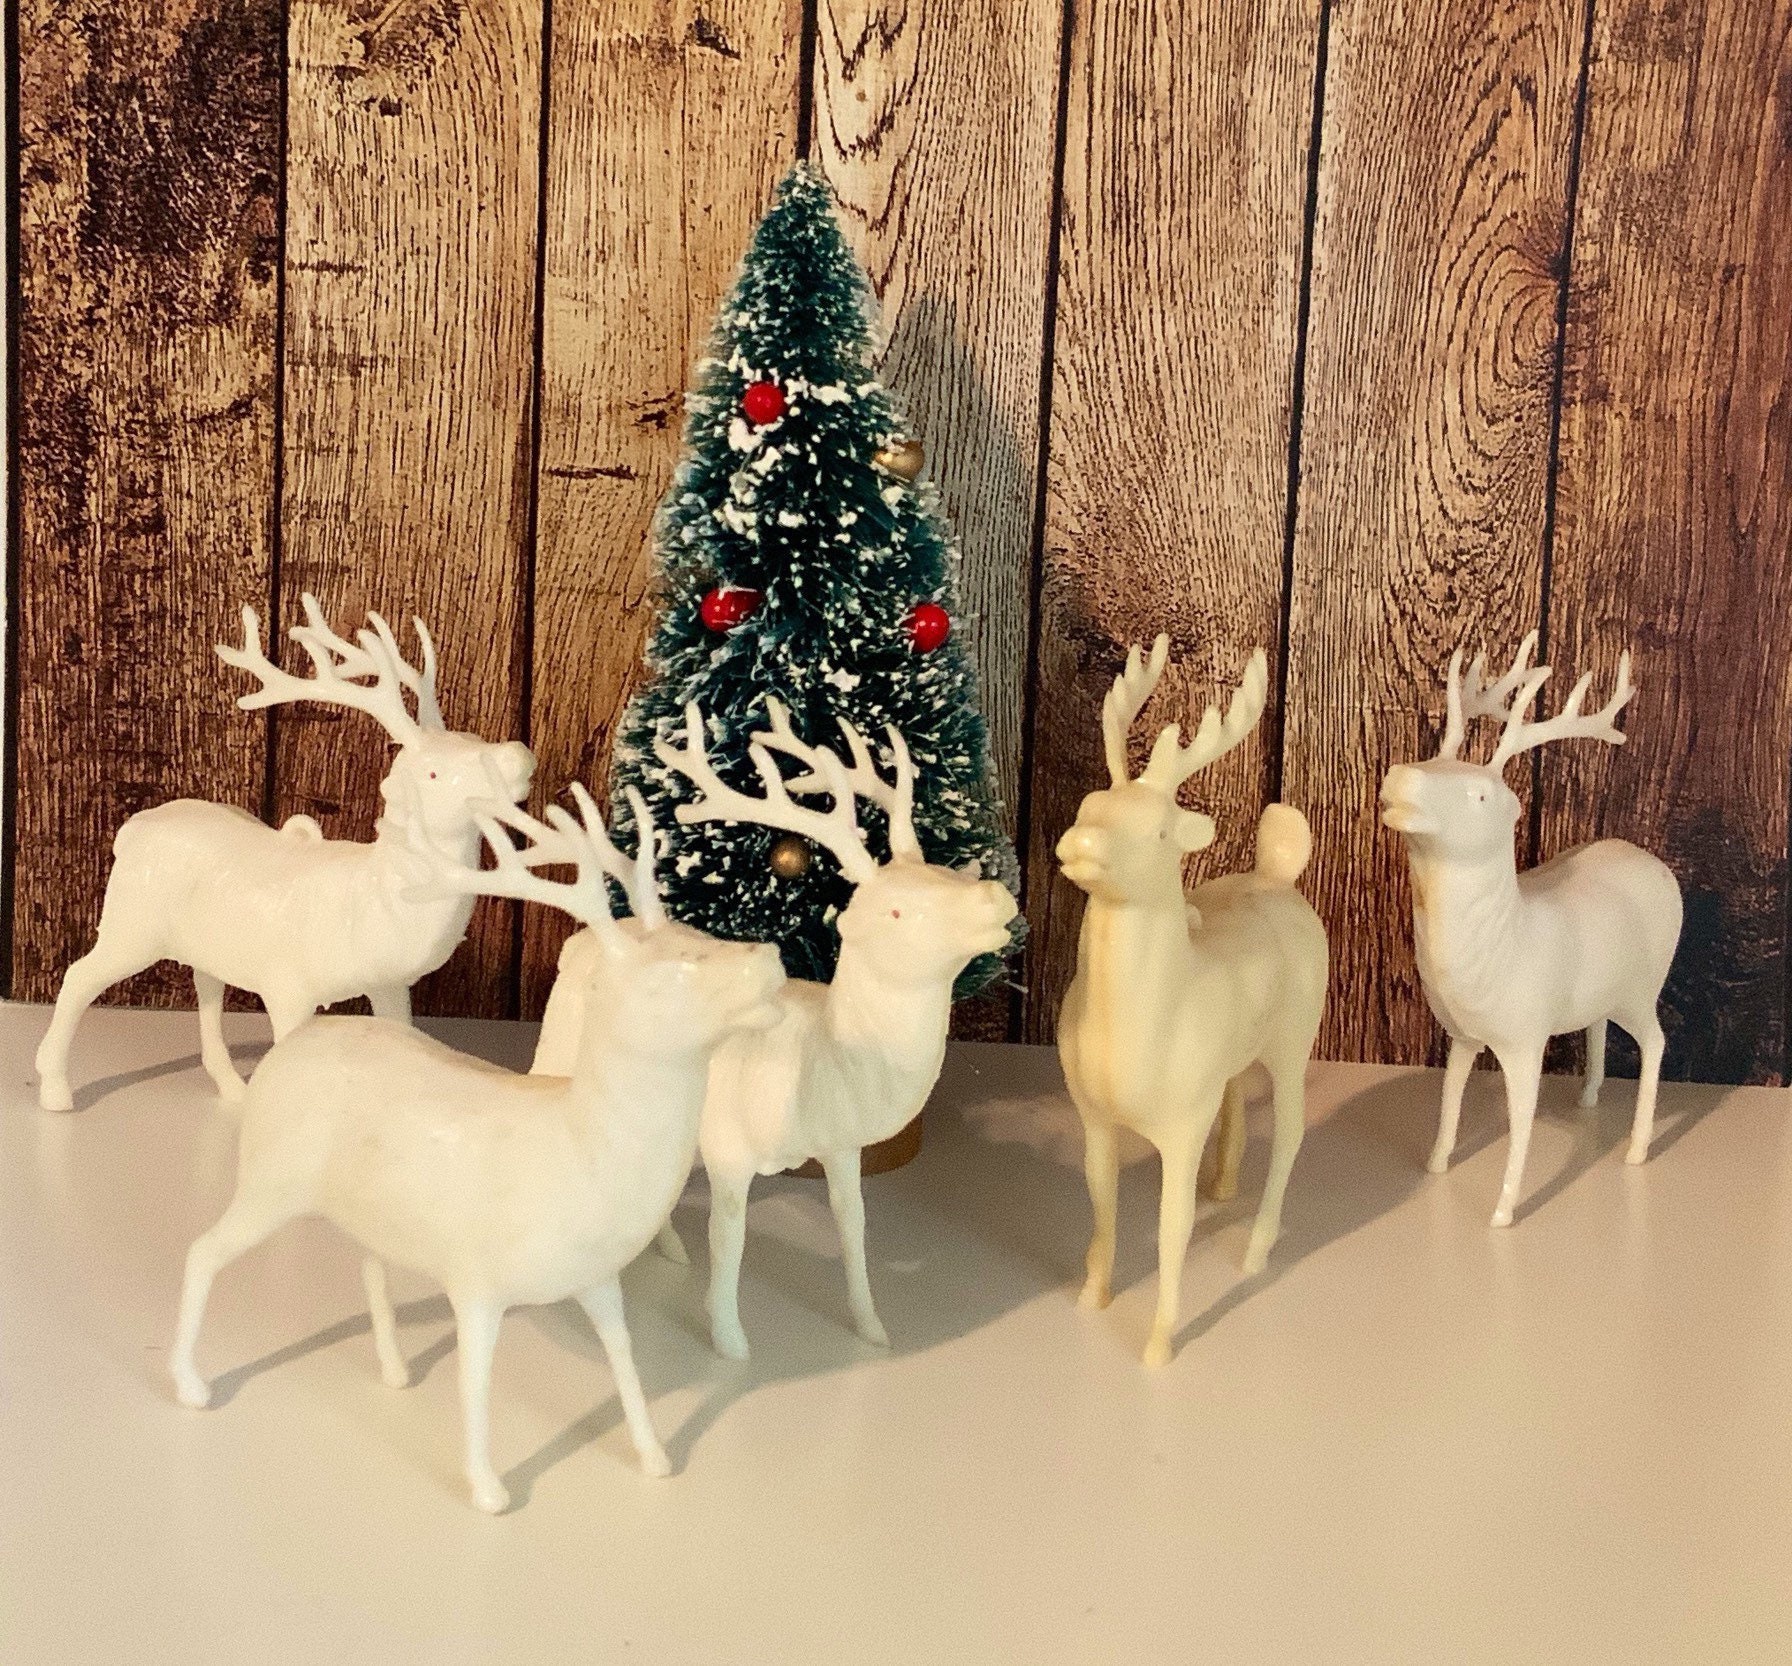 Details about   White Reindeer Hard Plastic Vintage Christmas Decoration Small 1950’s 